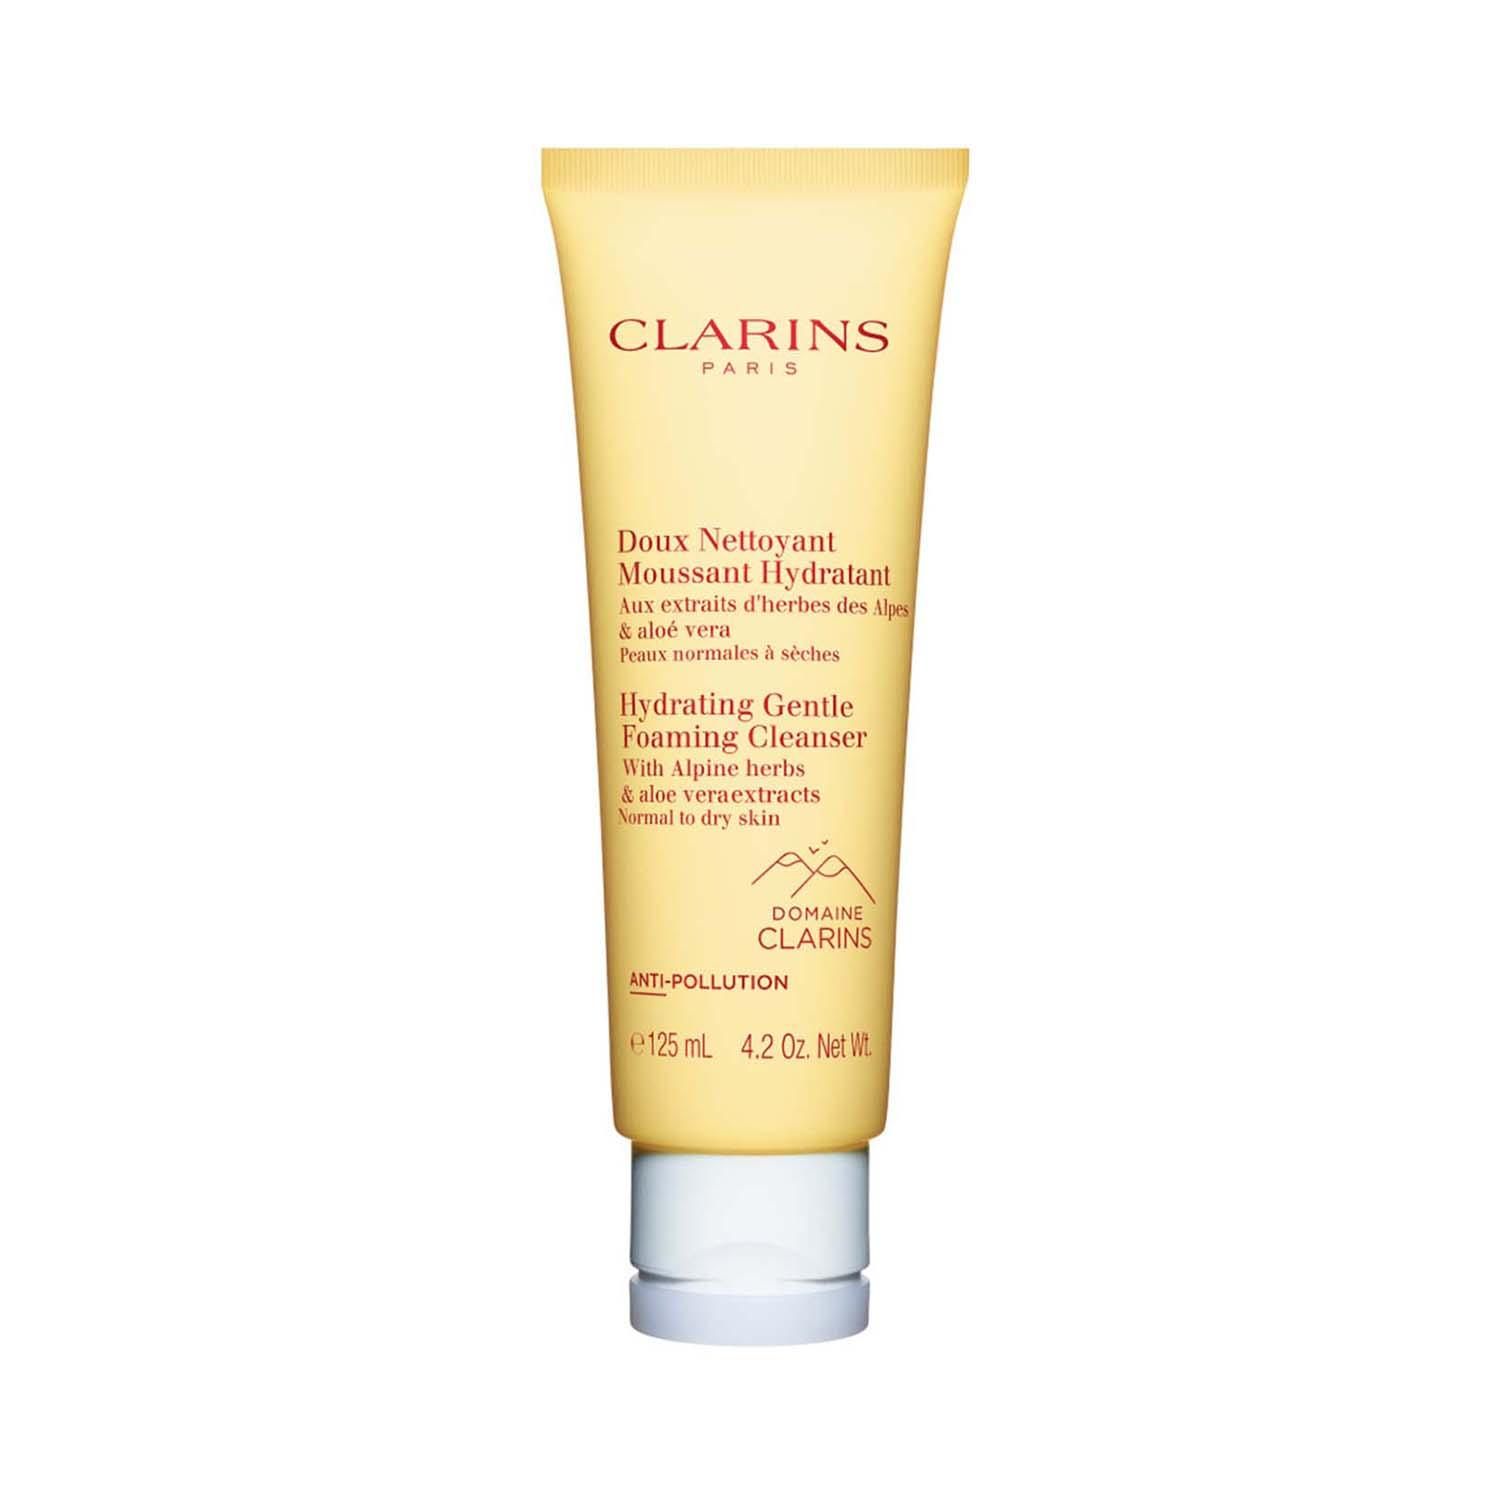 Clarins | Clarins Hydrating Gentle Foaming Cleanser (125 ml)